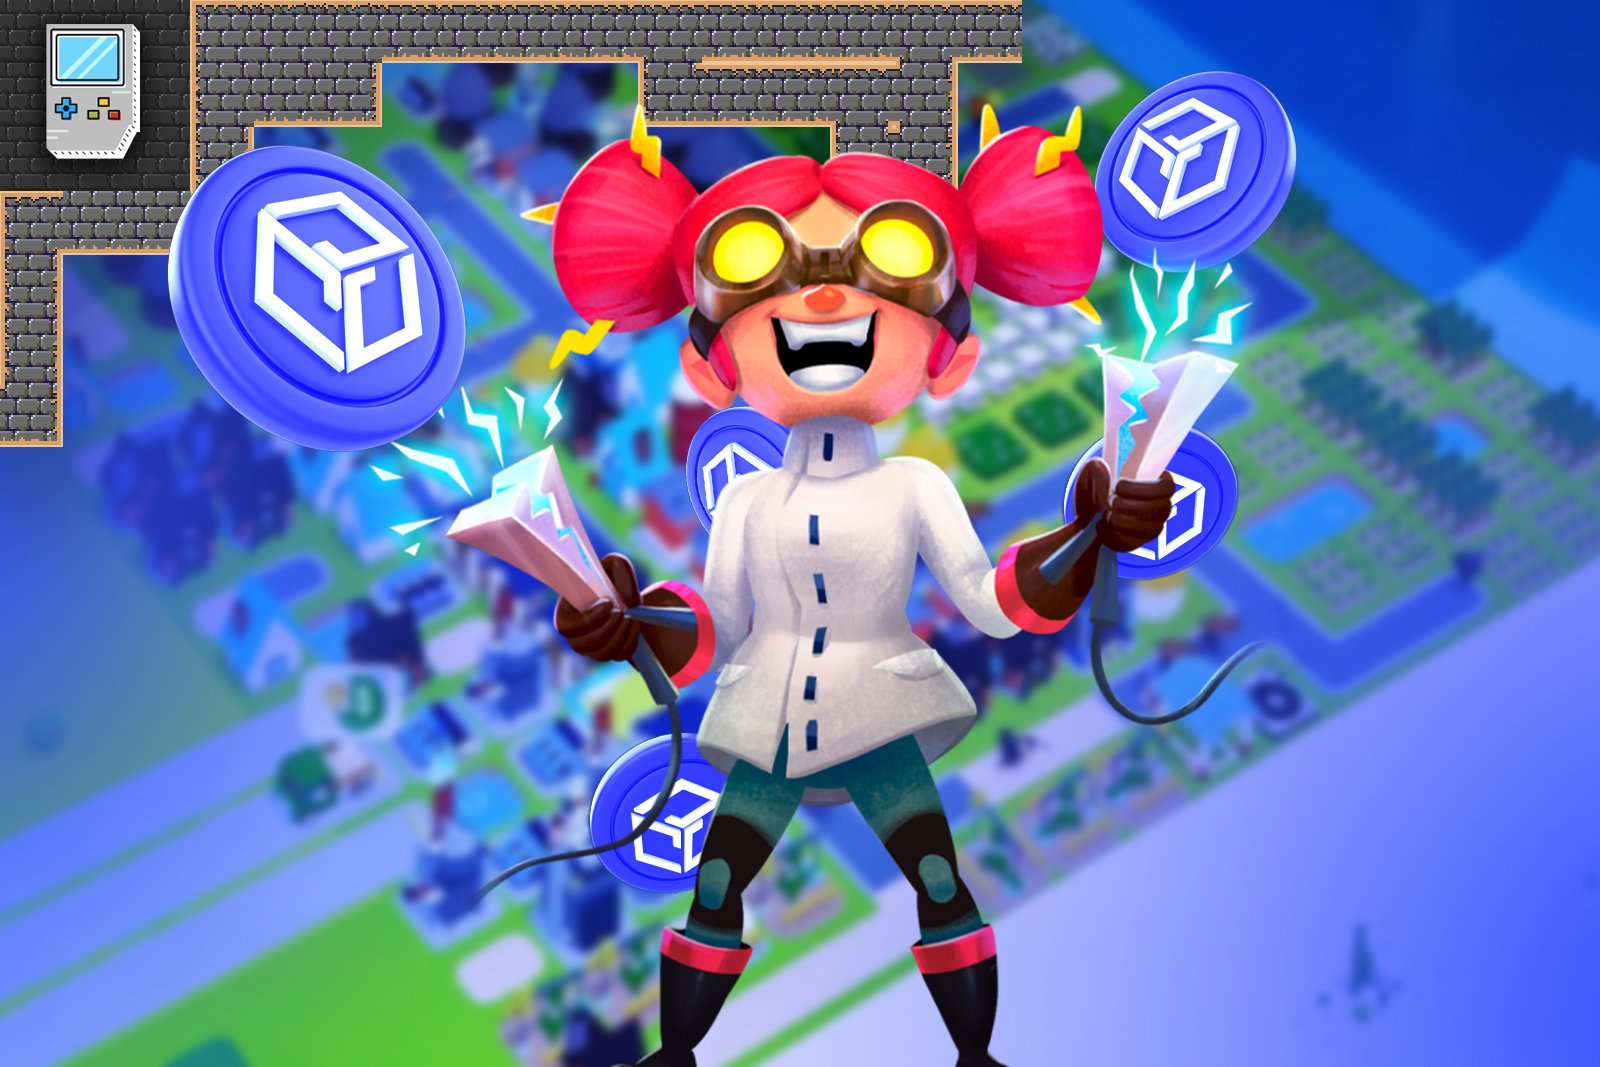 Game character with pink hair and a lab coat holding guns shooting tokens with Gala Games logo on them.